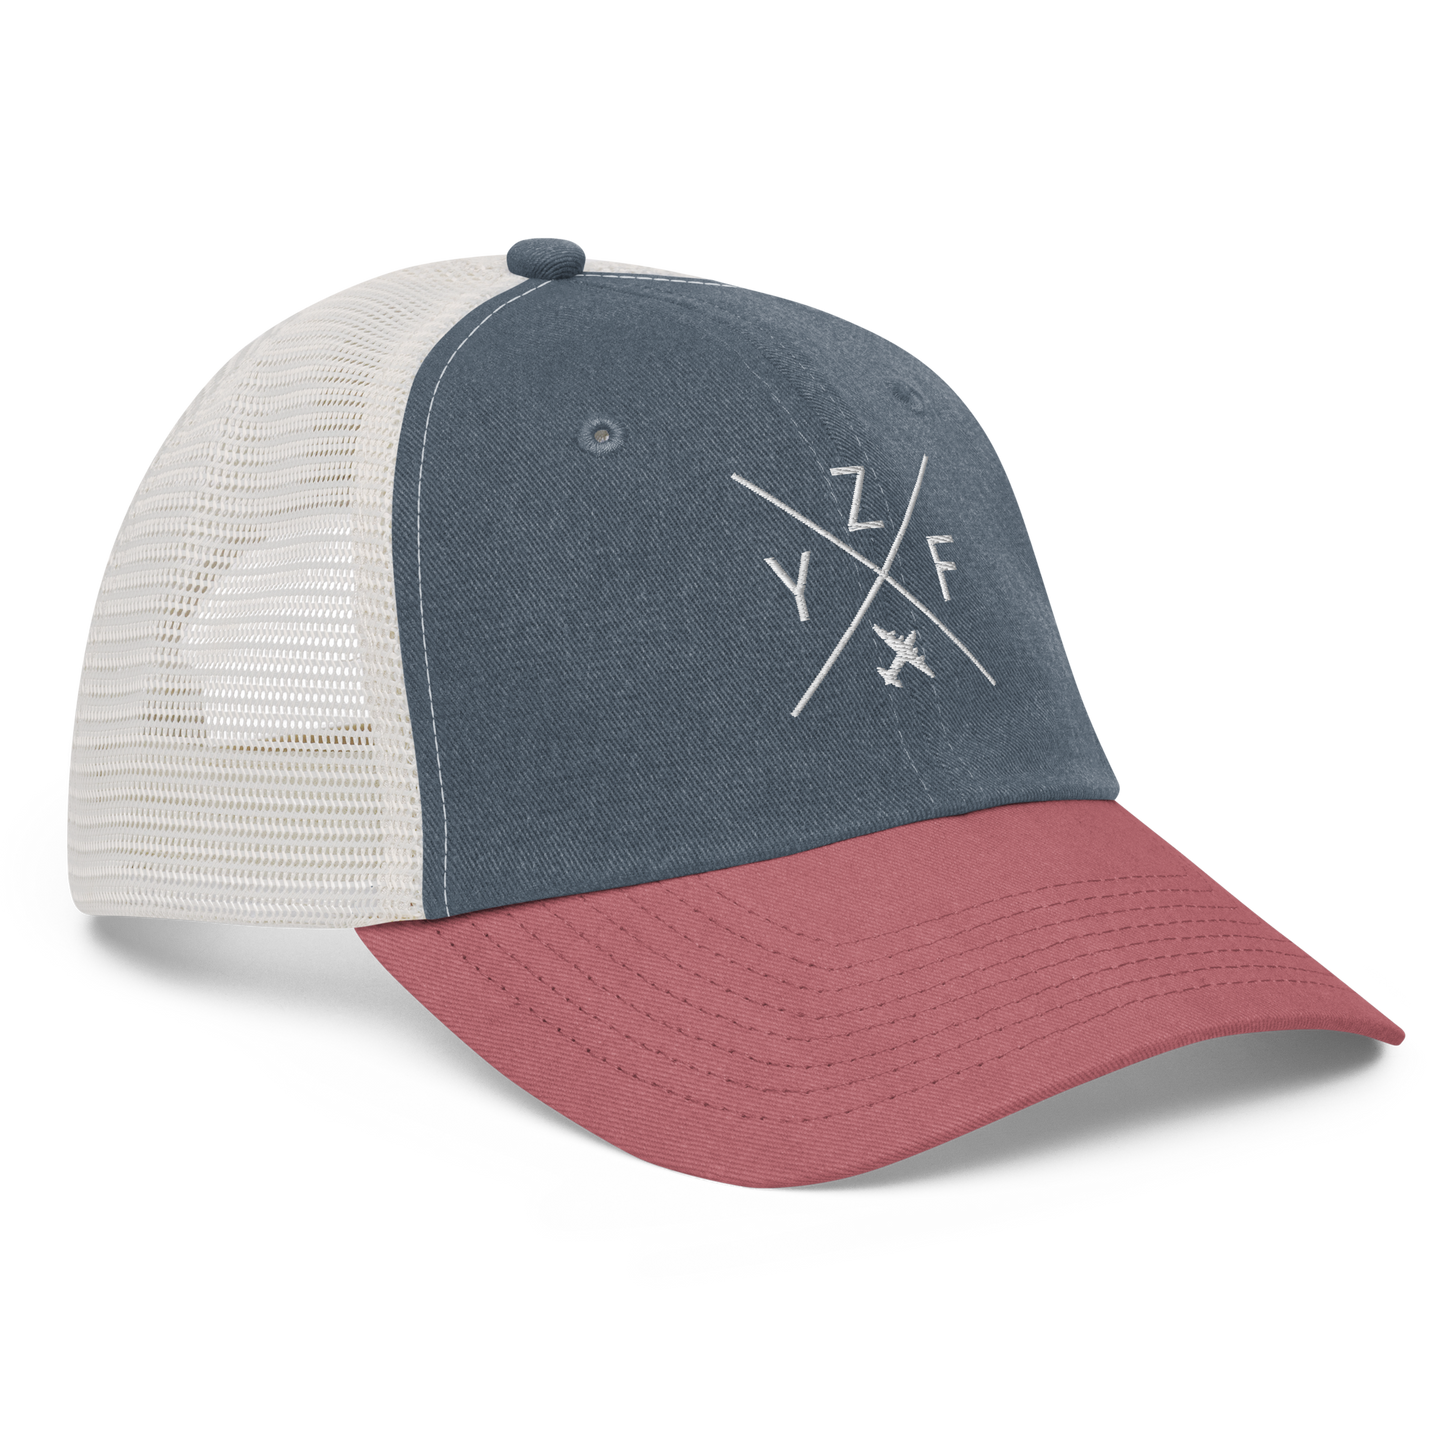 Crossed-X Pigment-Dyed Trucker Cap • YZF Yellowknife • YHM Designs - Image 13